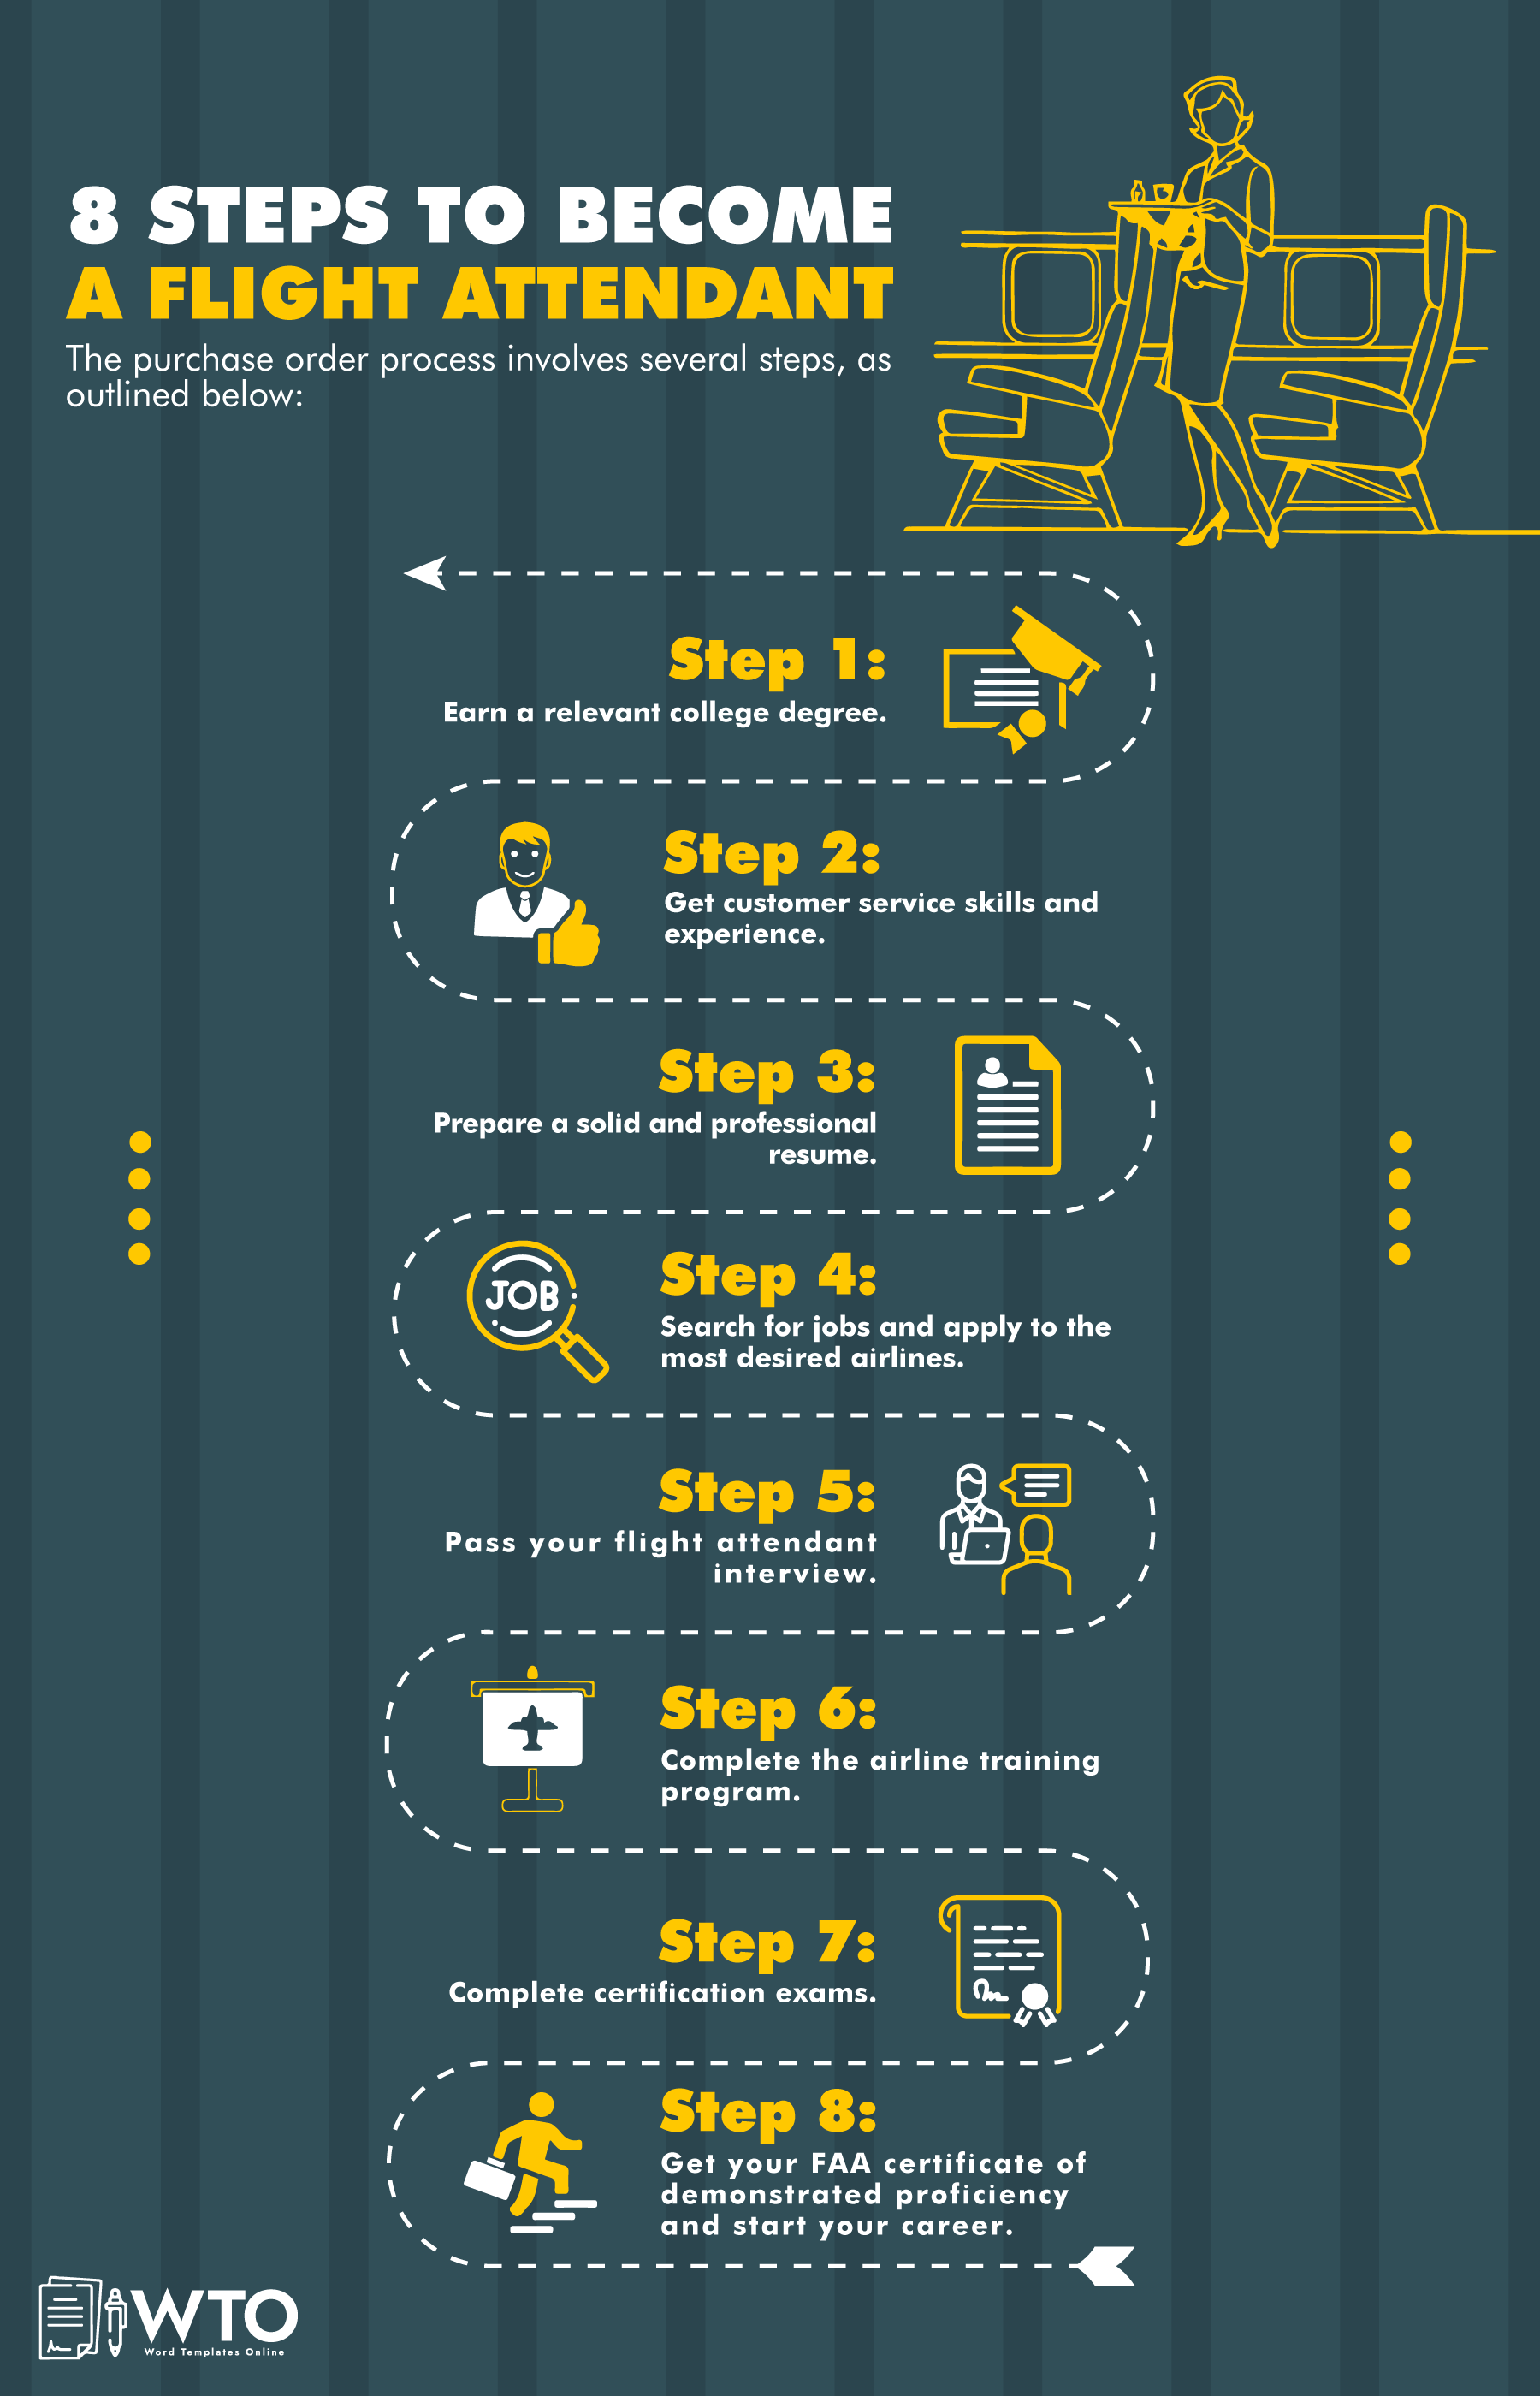 8 steps to become a flight attendant infographic